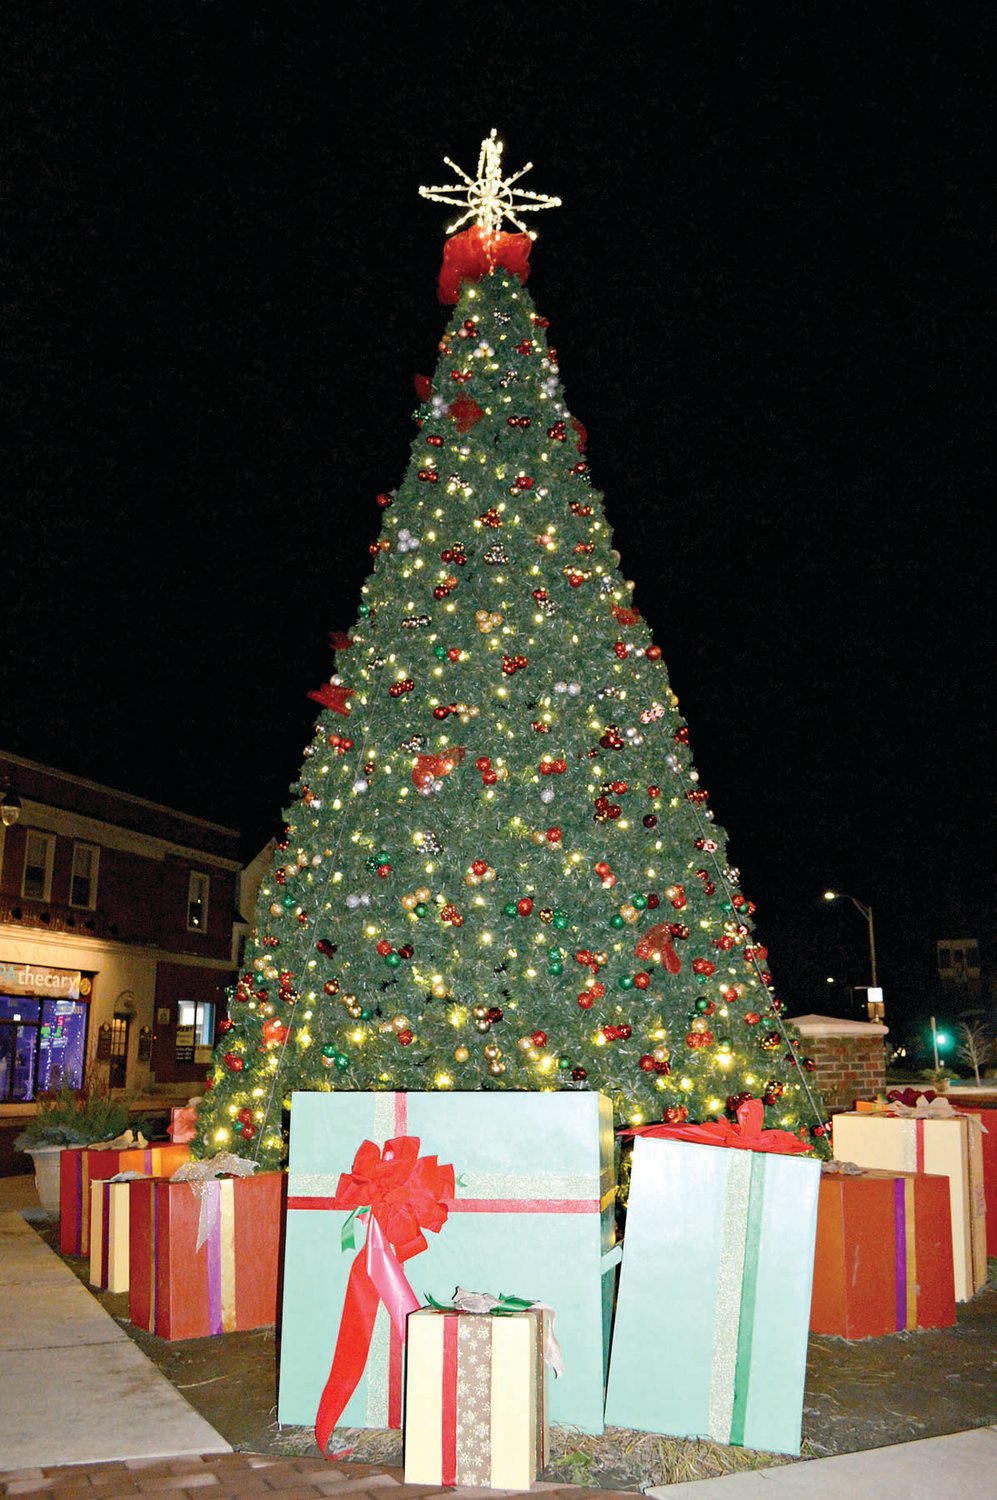 The Quakertown Christmas tree. Photograph by Michele Buono.